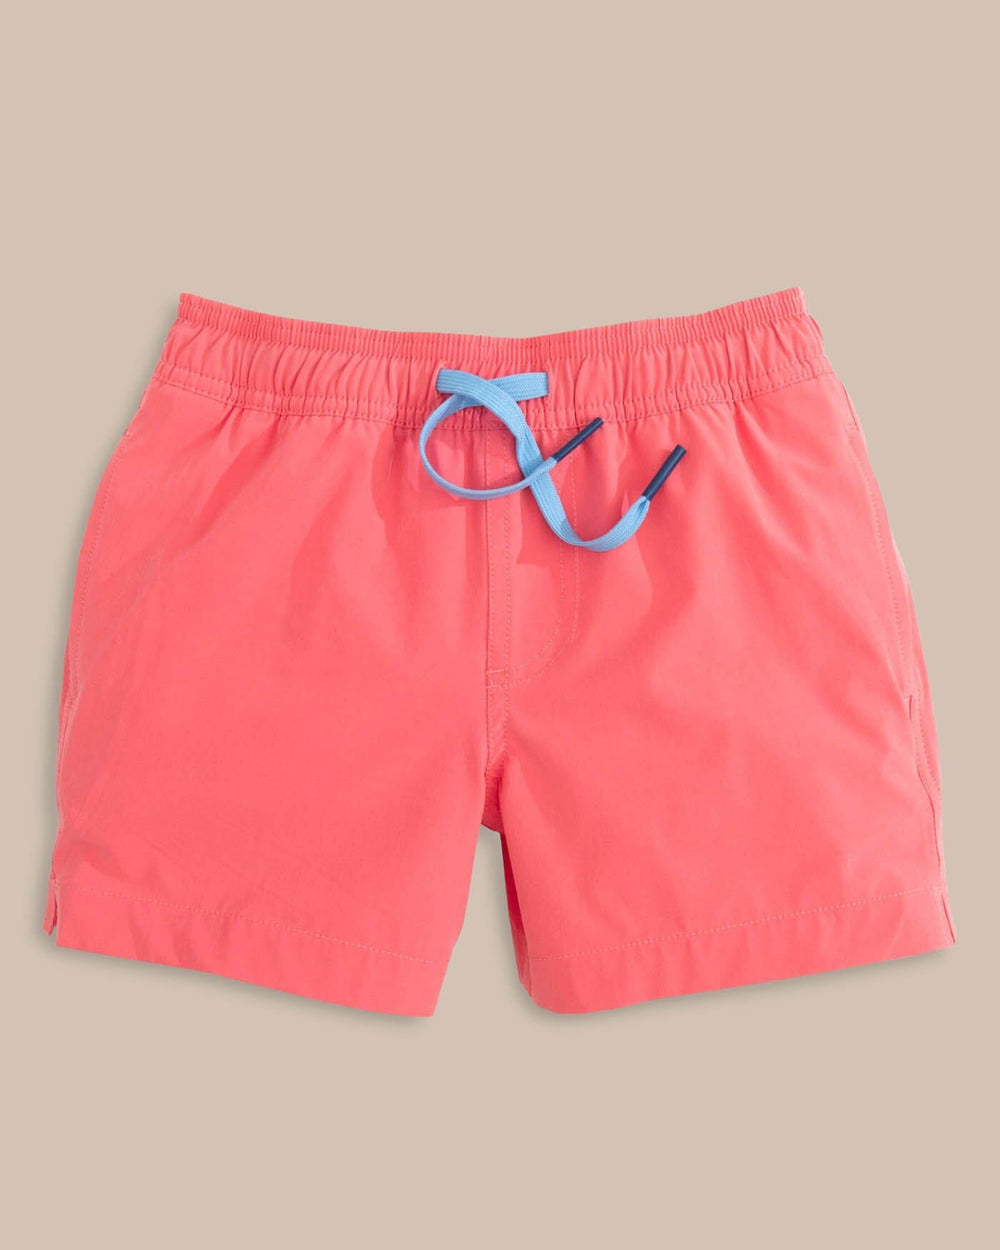 The front view of the Southern Tide Boys Solid Swim Truck 2 0 by Southern Tide - Sunkist Coral